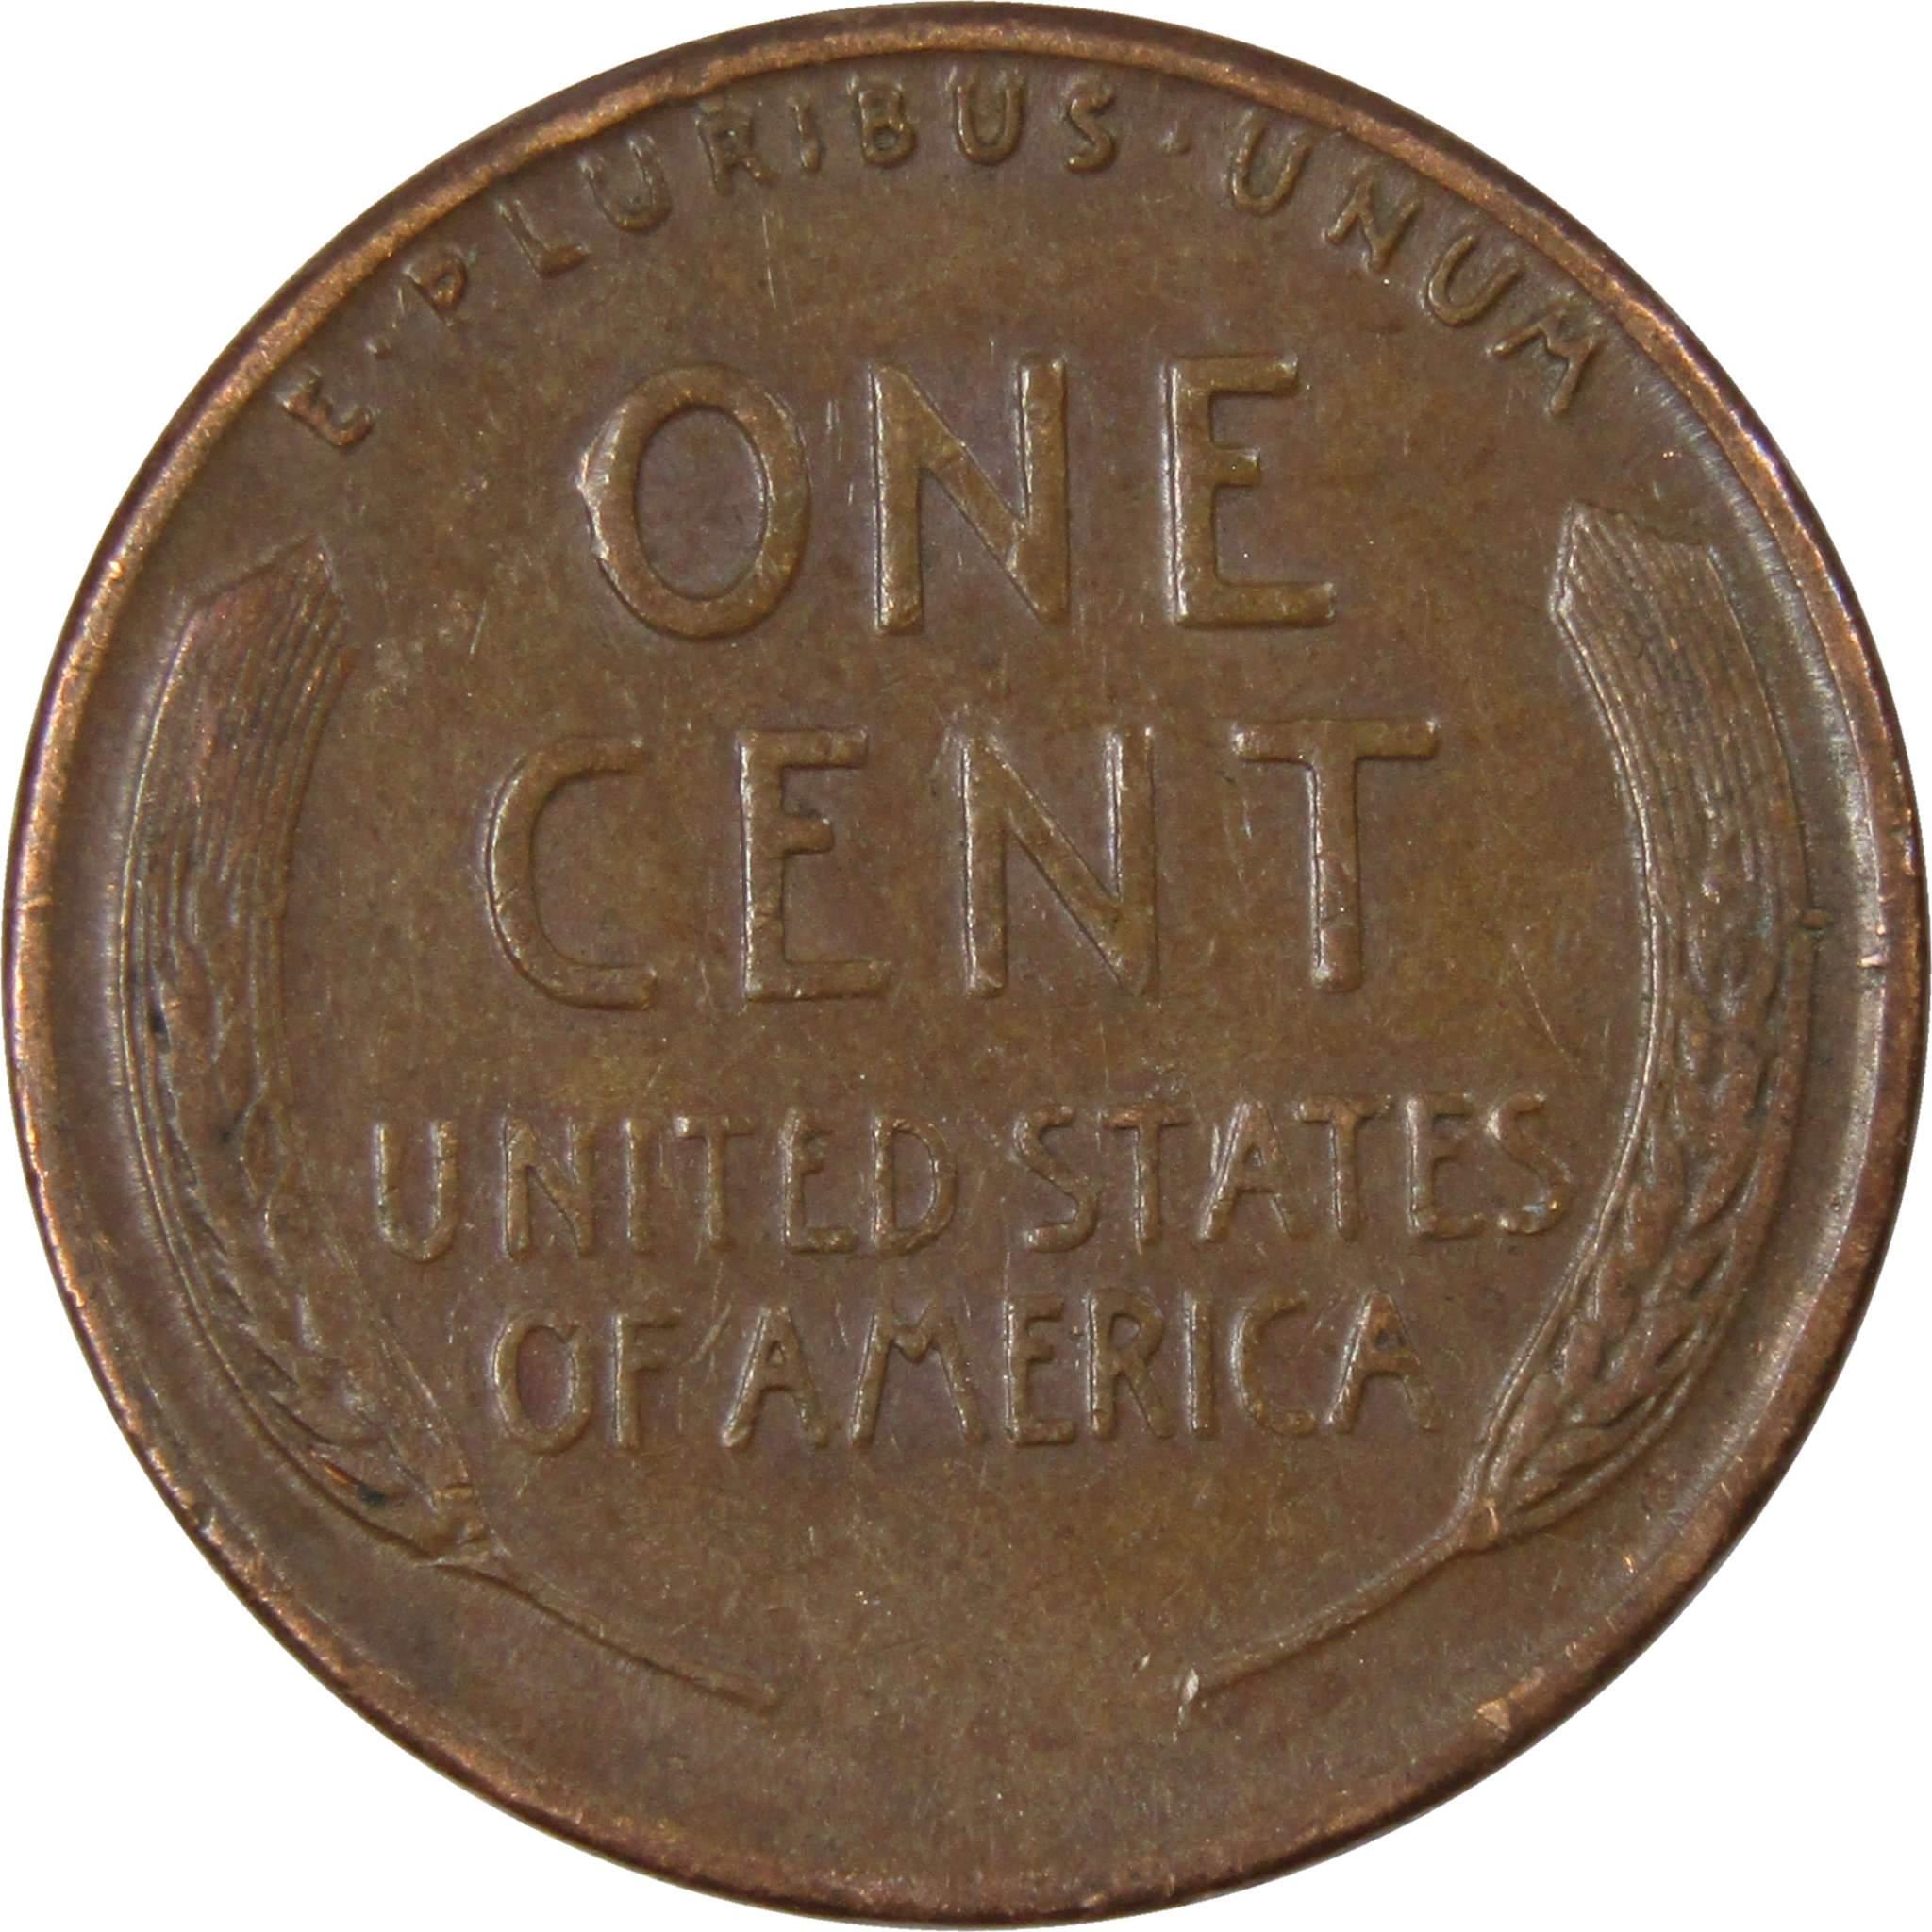 1955 Lincoln Wheat Cent AG About Good Bronze Penny 1c Coin Collectible